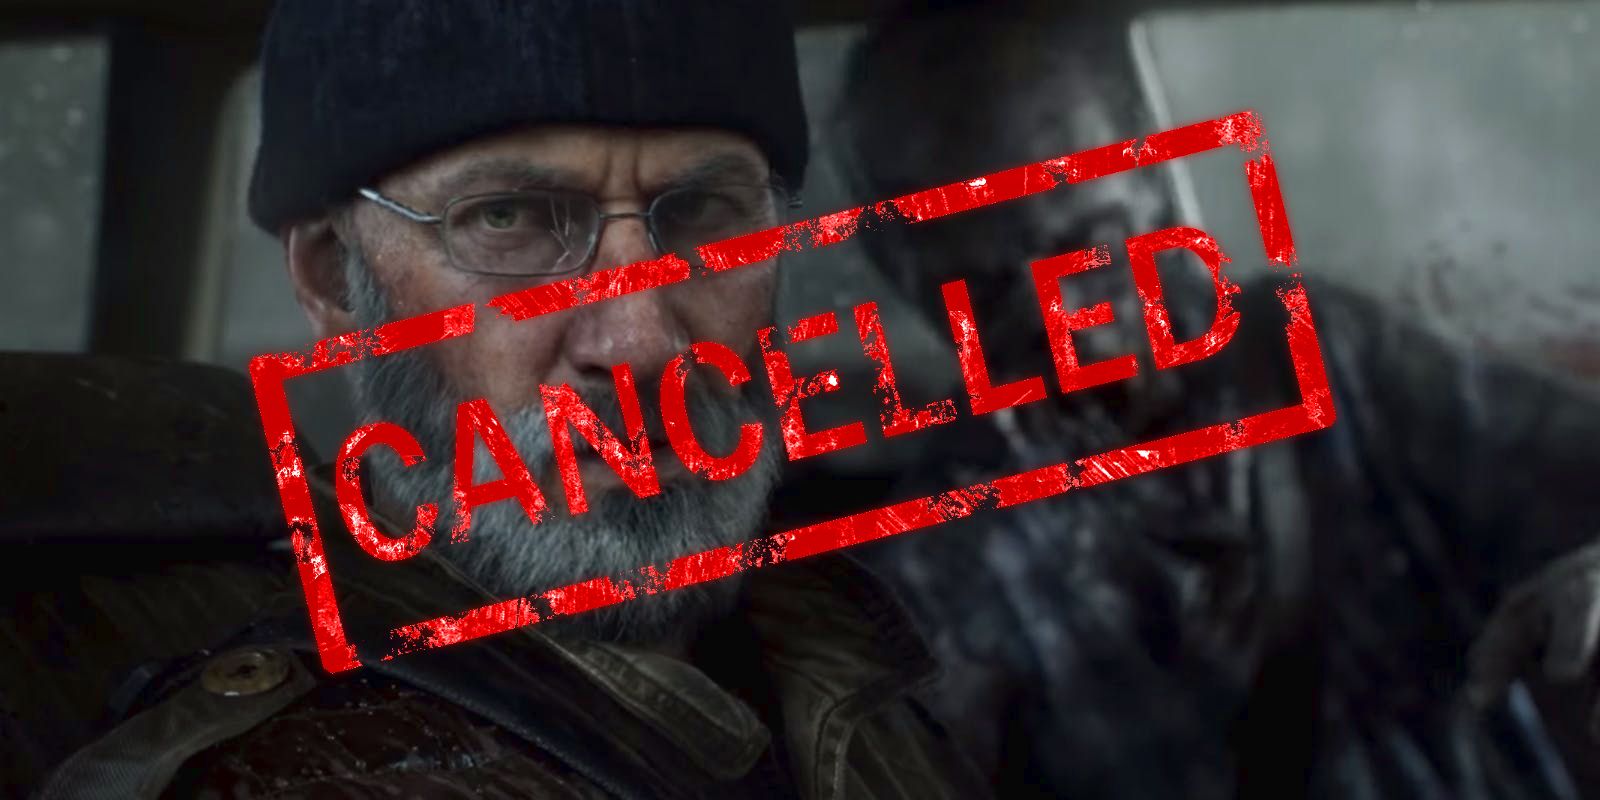 Overkills The Walking Dead Canceled 4 Months After Release (For Consoles)